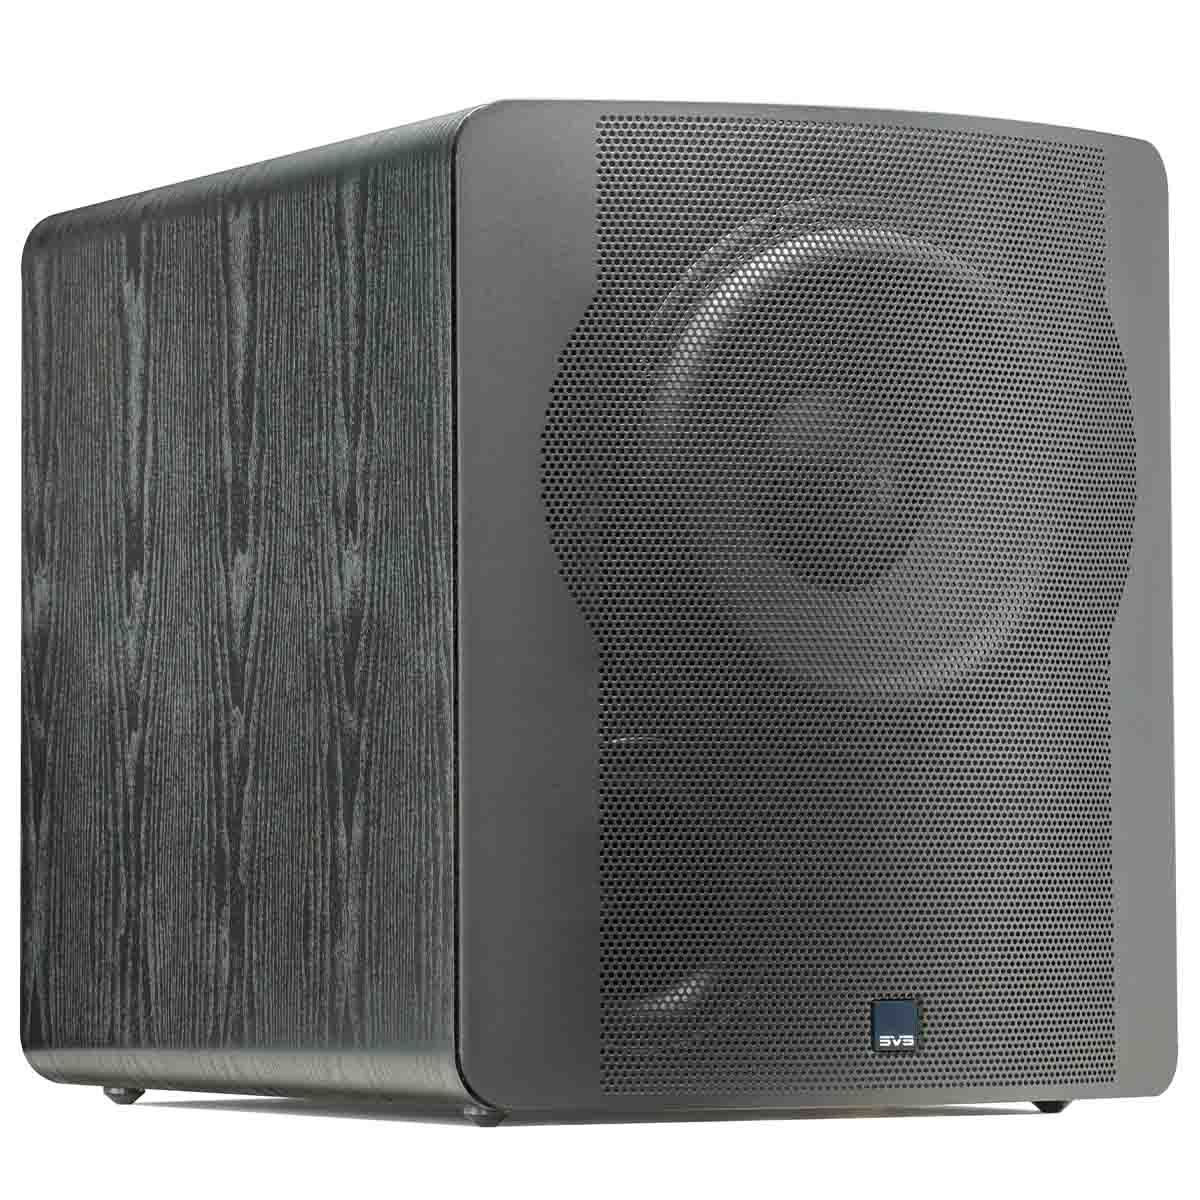 SVS PB-2000 12" Ported Subwoofer - Premium Black Ash - angled front view with grille